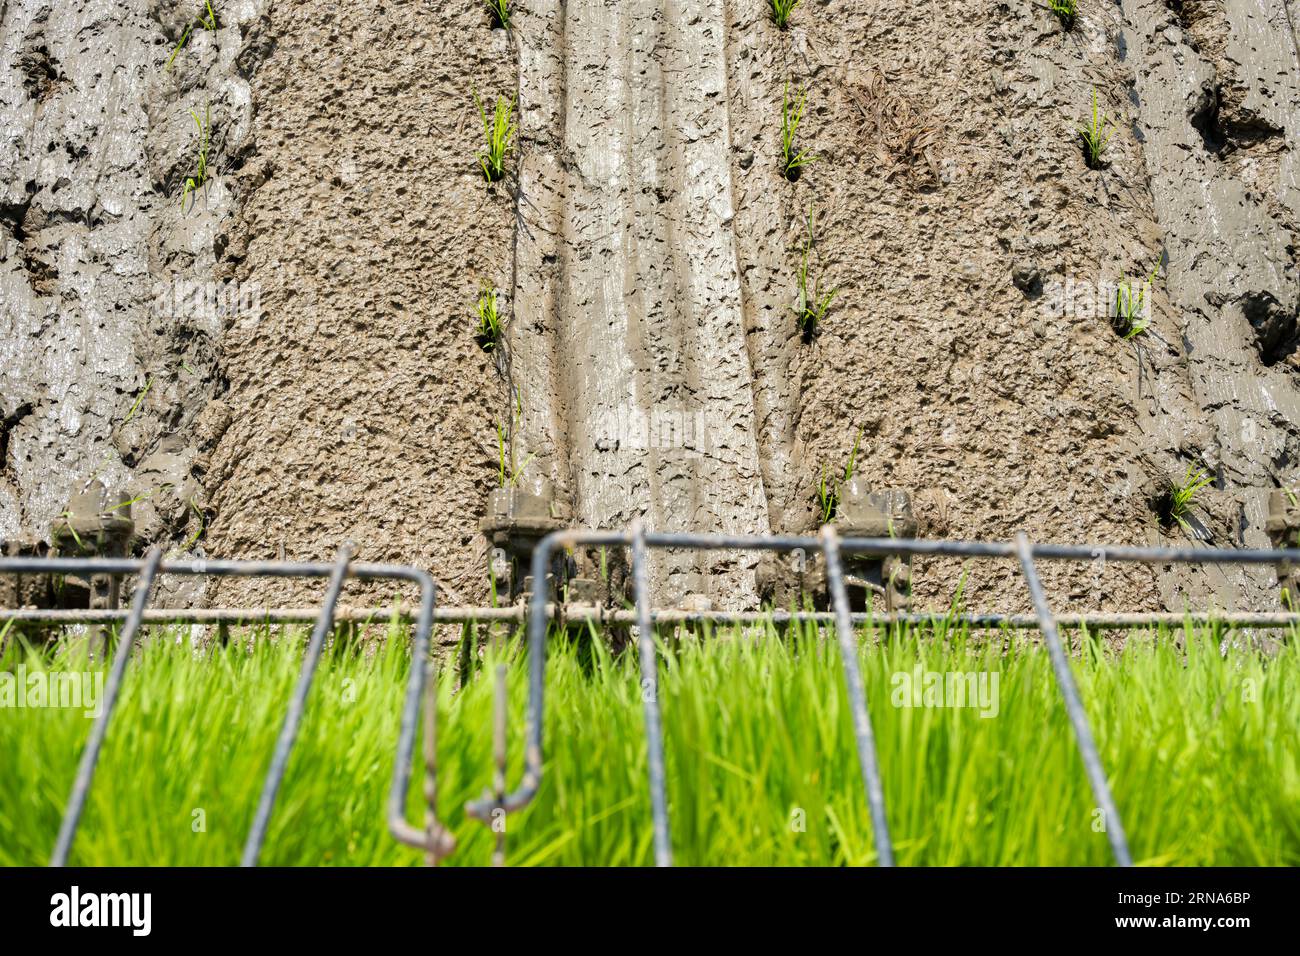 rice transplanter working on the field at horizontal composition Stock Photo